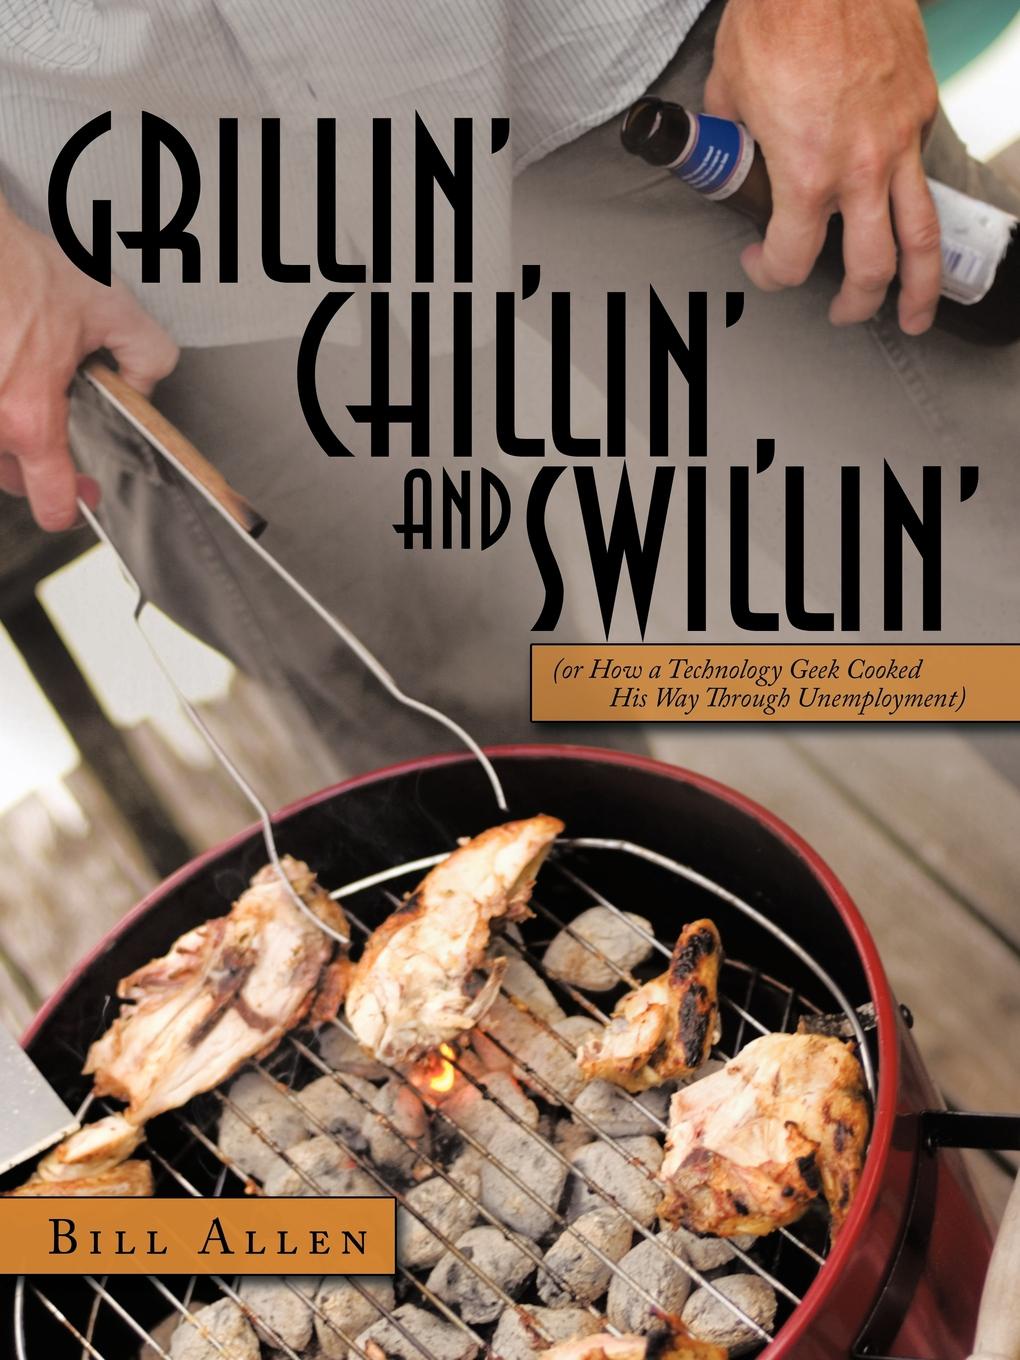 Grillin`, Chillin`, and Swillin`. Or How a Technology Geek Cooked His Way Through Unemployment